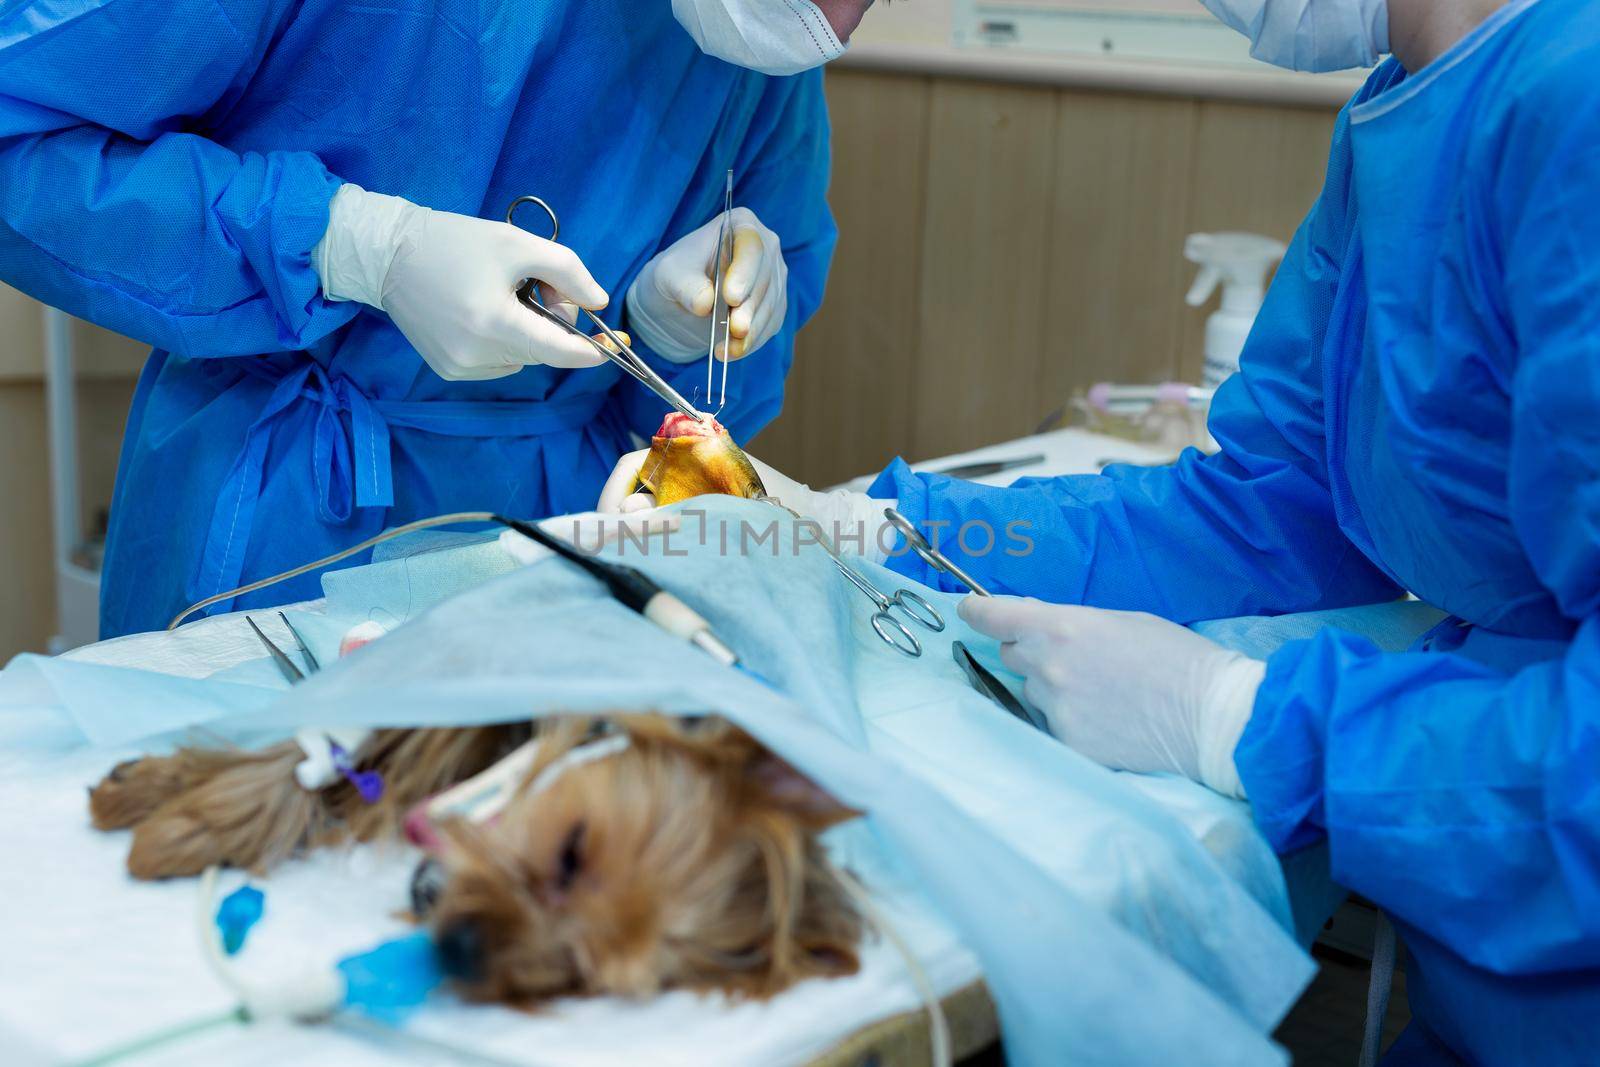 Veterinary clinic. Surgery dog's feet. The doctor sews up the leg of the dog.